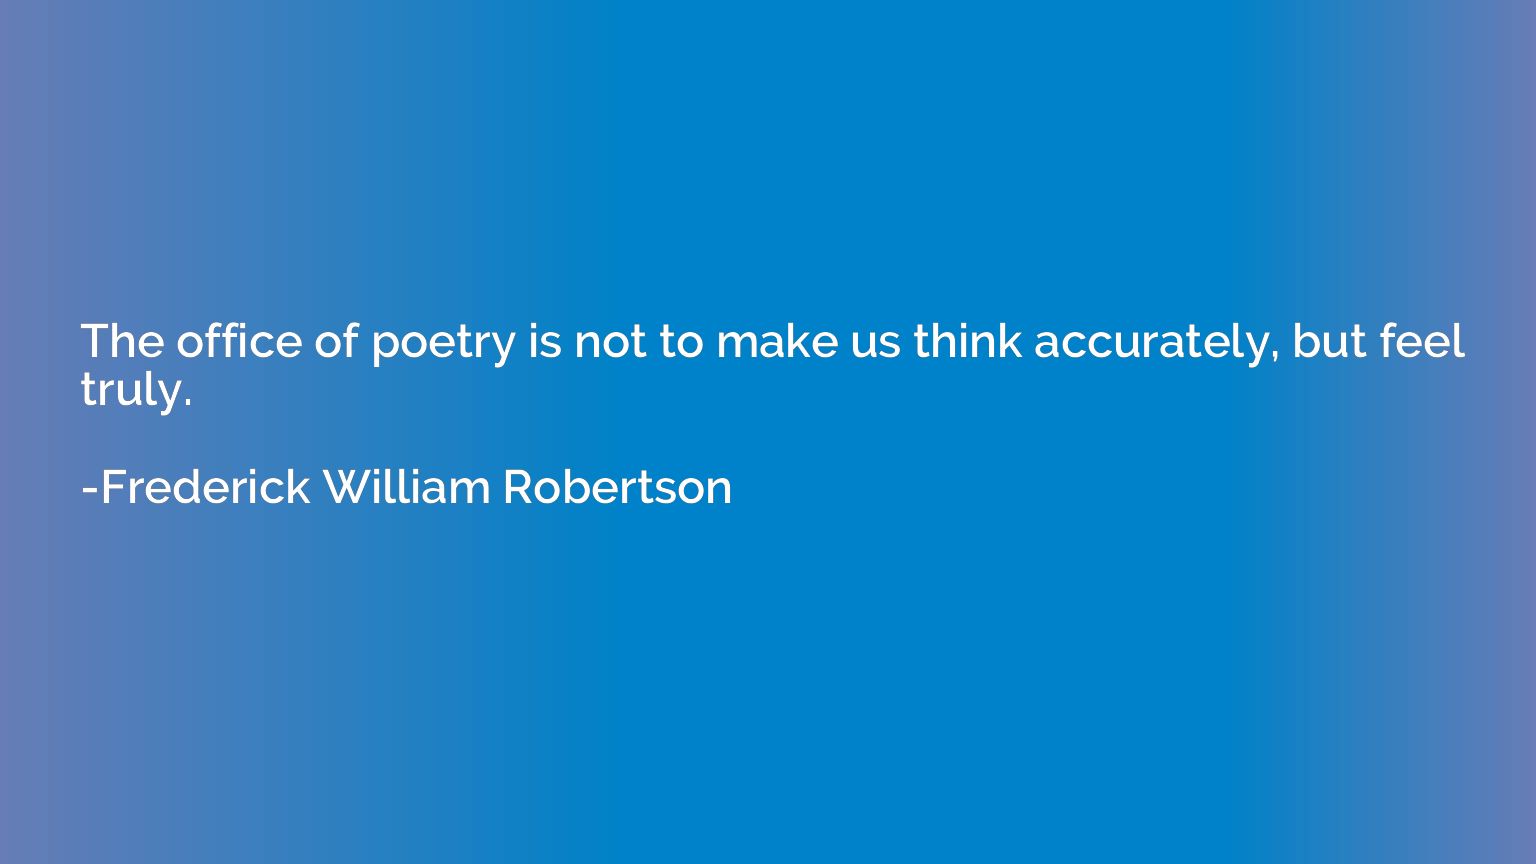 The office of poetry is not to make us think accurately, but